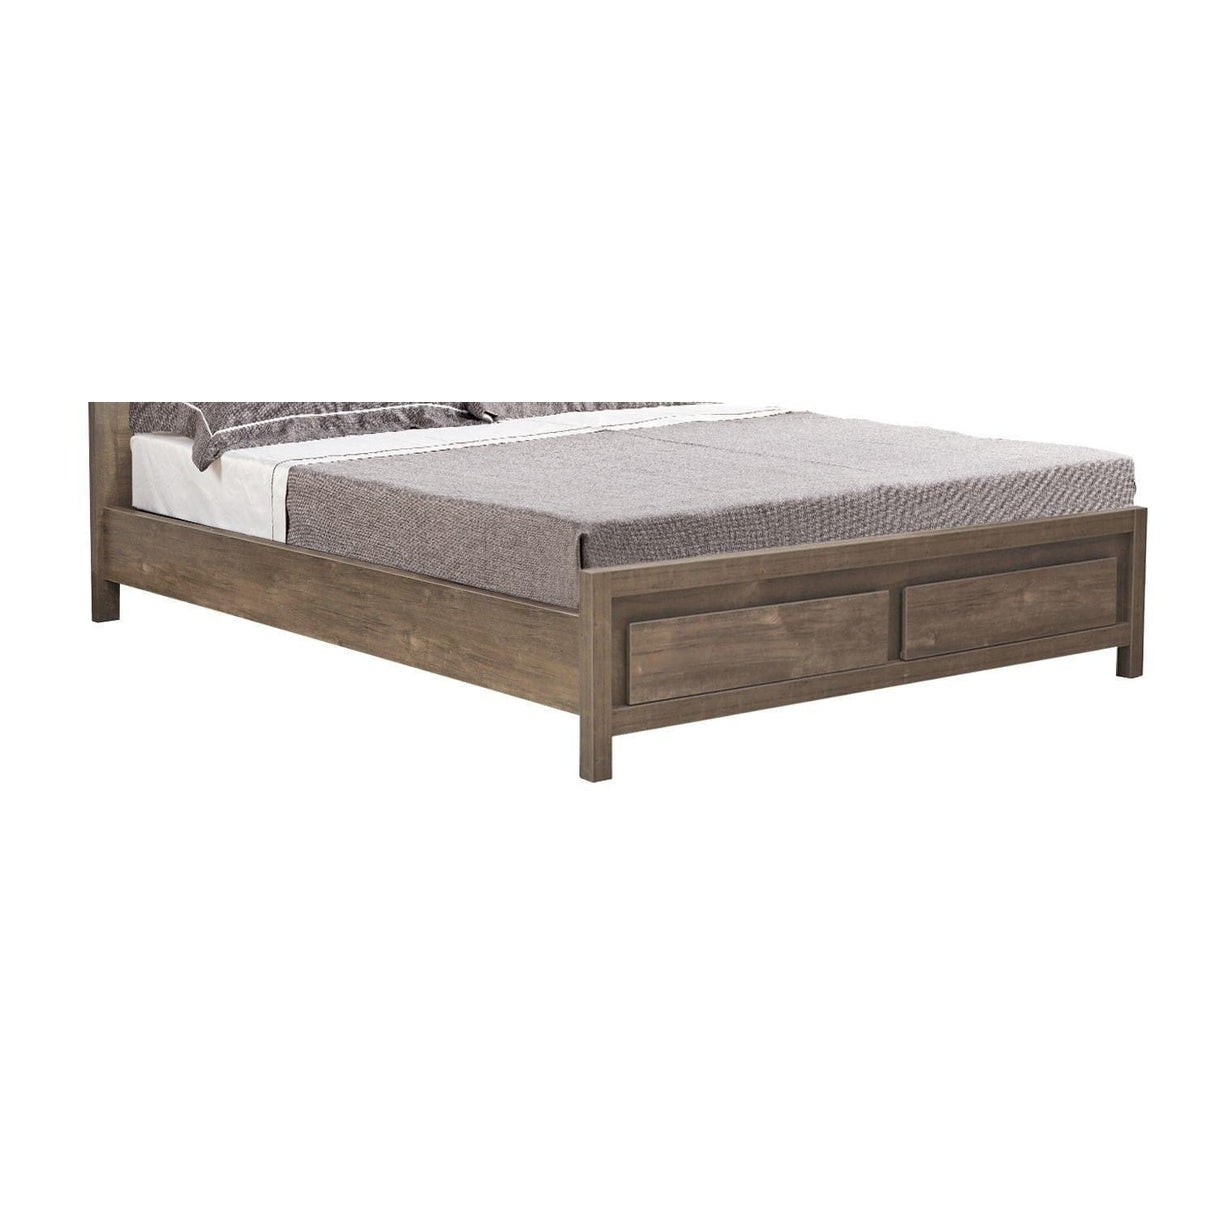 ID USA Queen Bed Frame B3702Q - Bedroom Depot USA